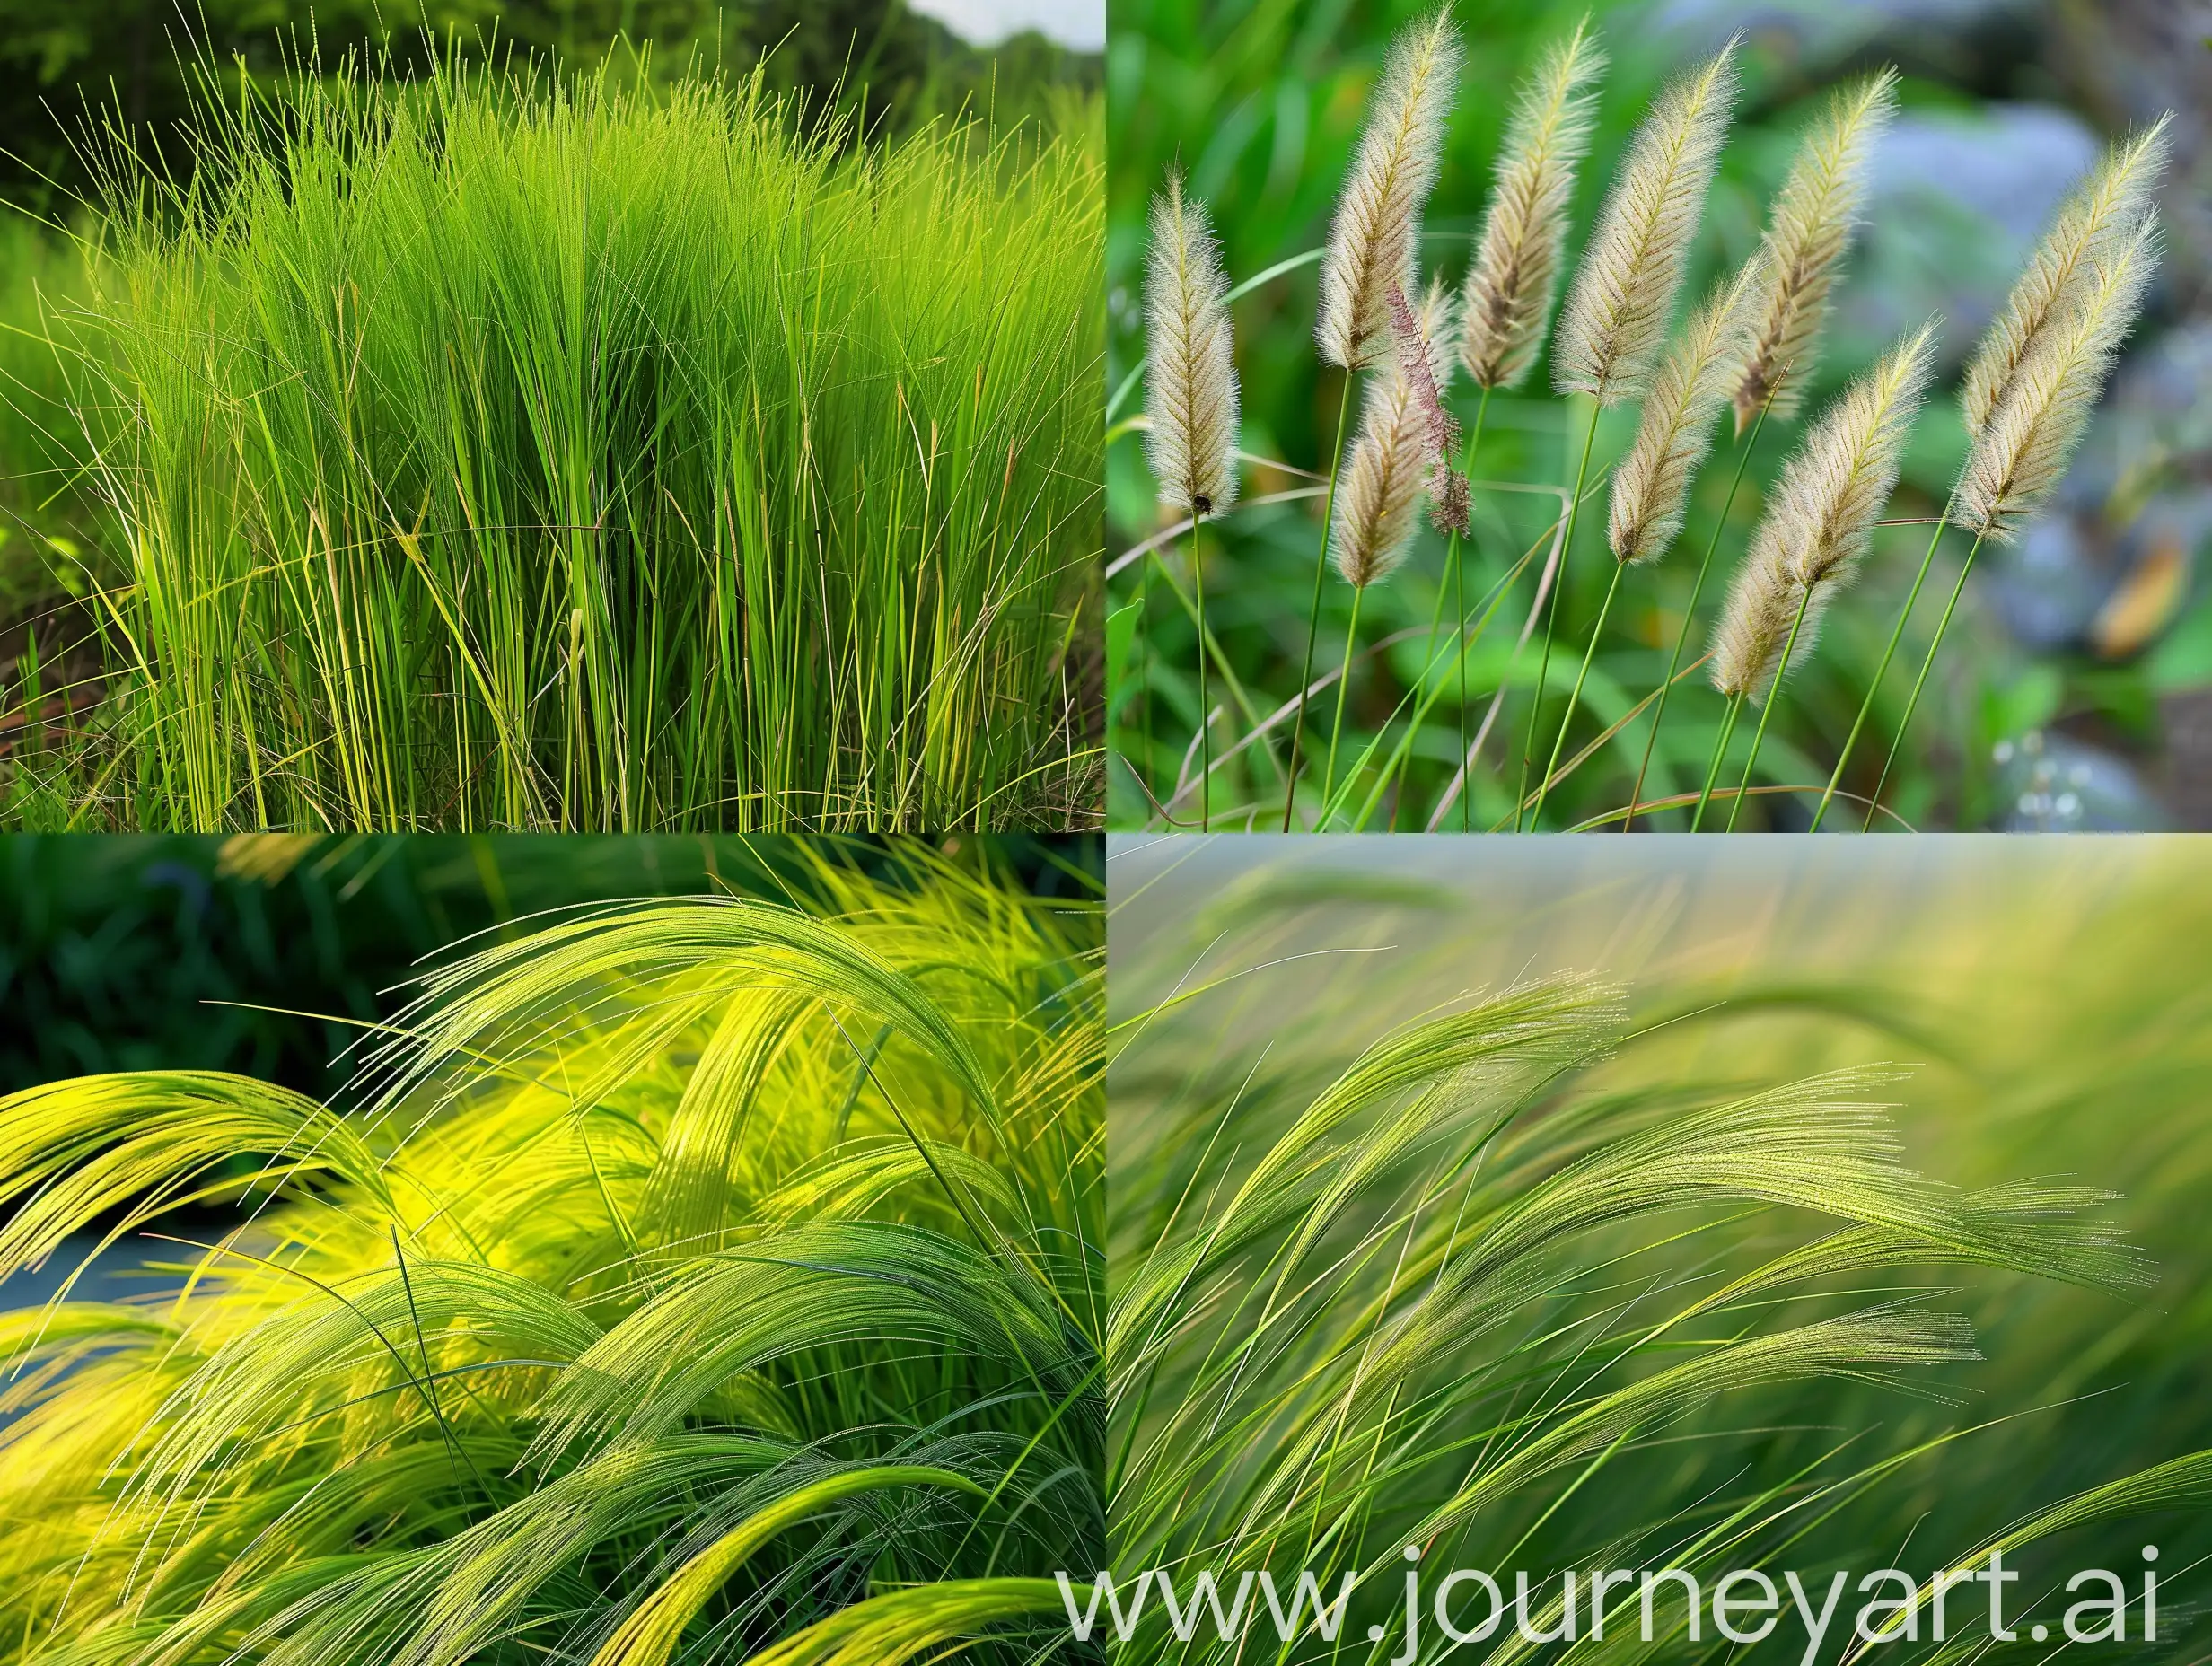 Lush-Dogtail-Grass-Scenery-in-High-Definition-Photography